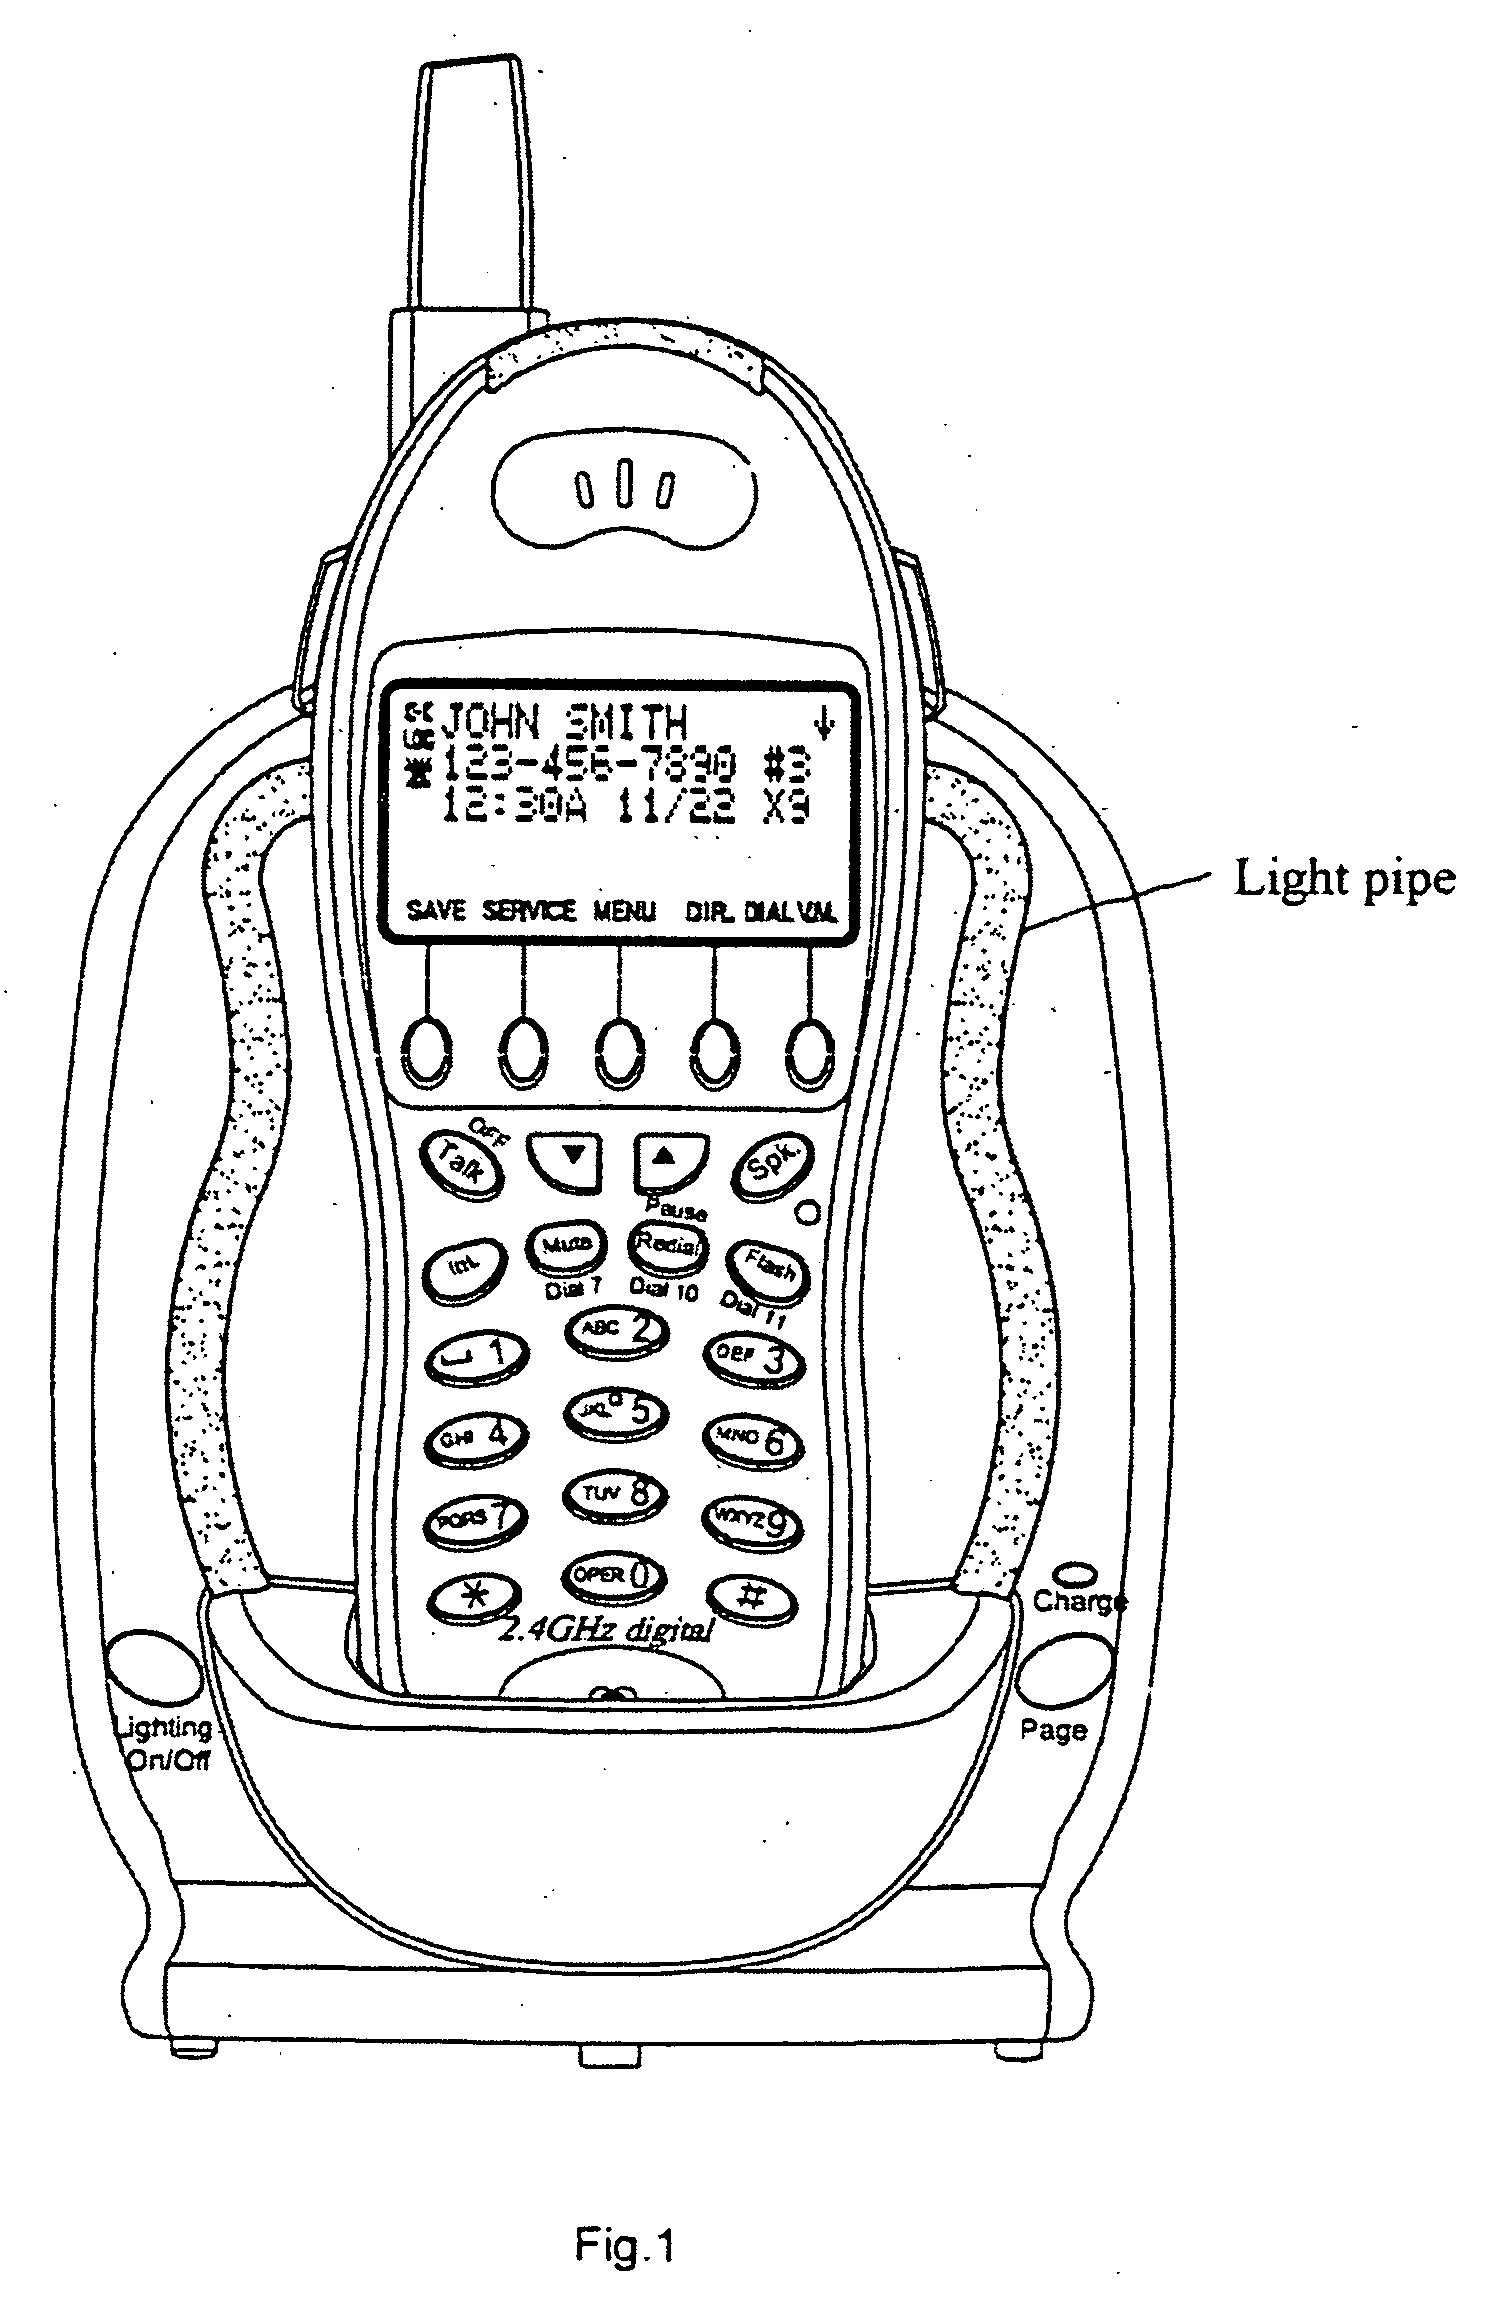 Telephone device with ornamental lighting